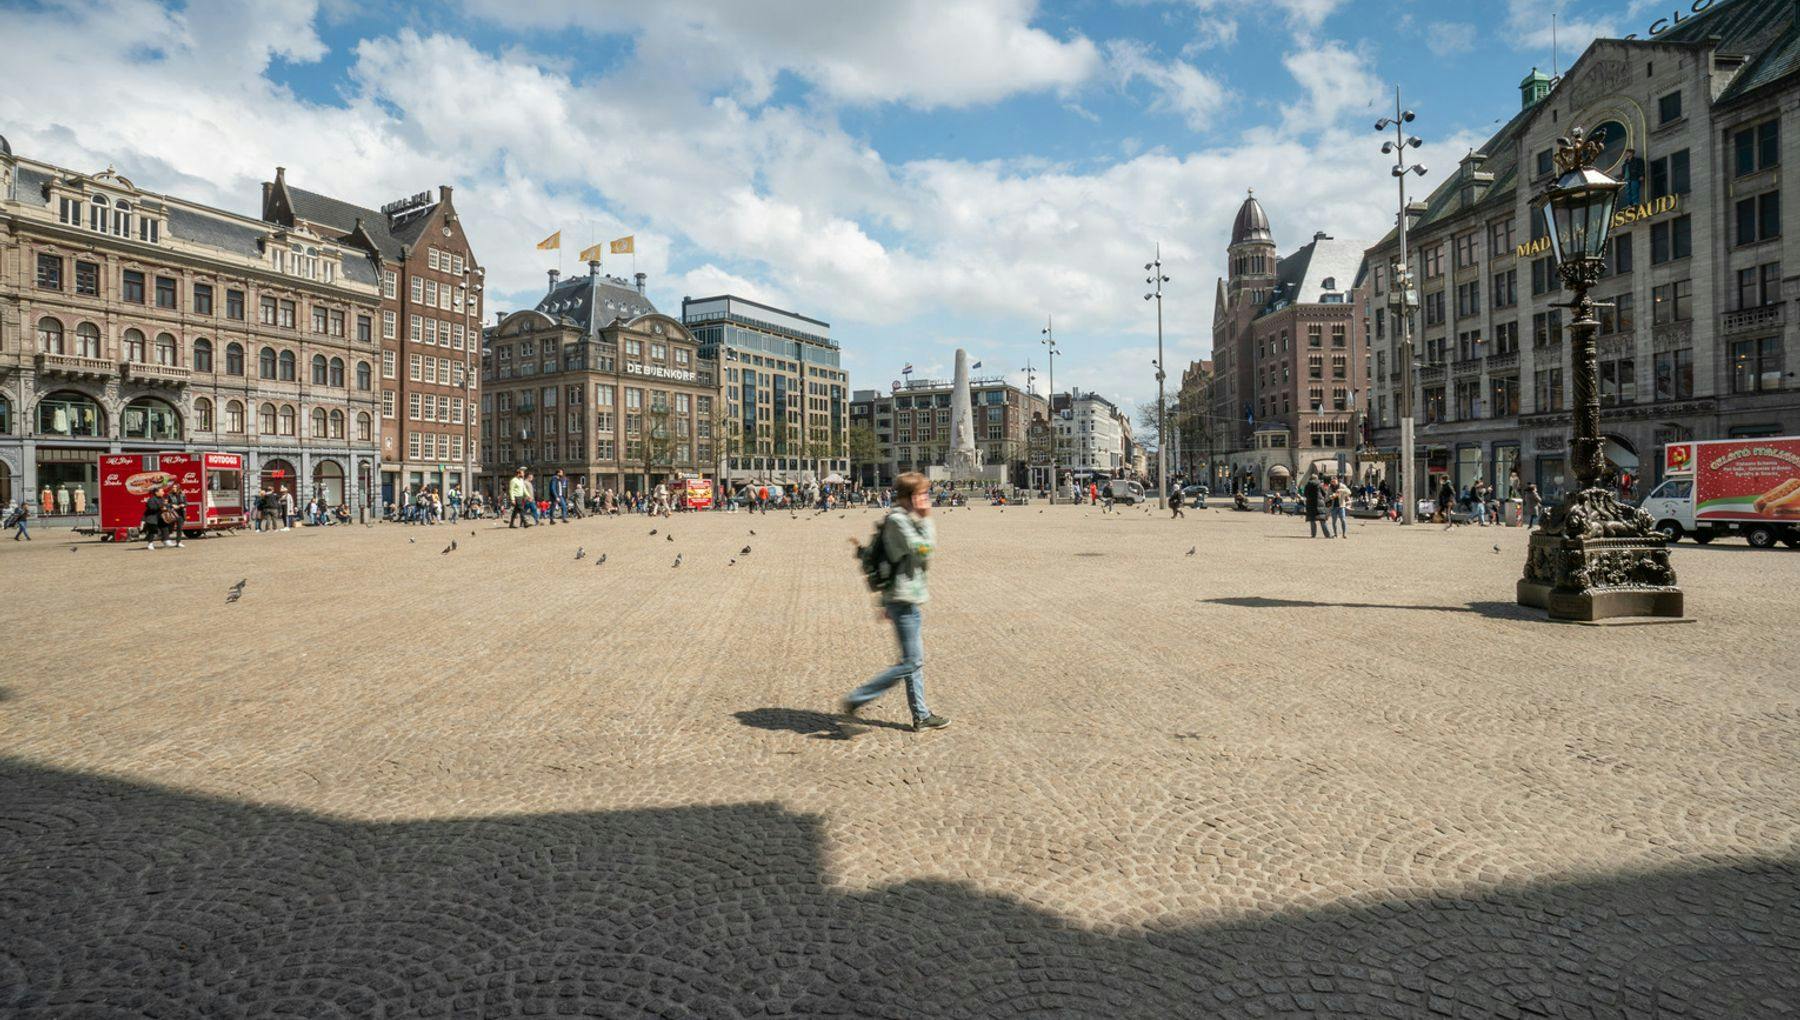 Overview of Dam Square with a view of the National Monument